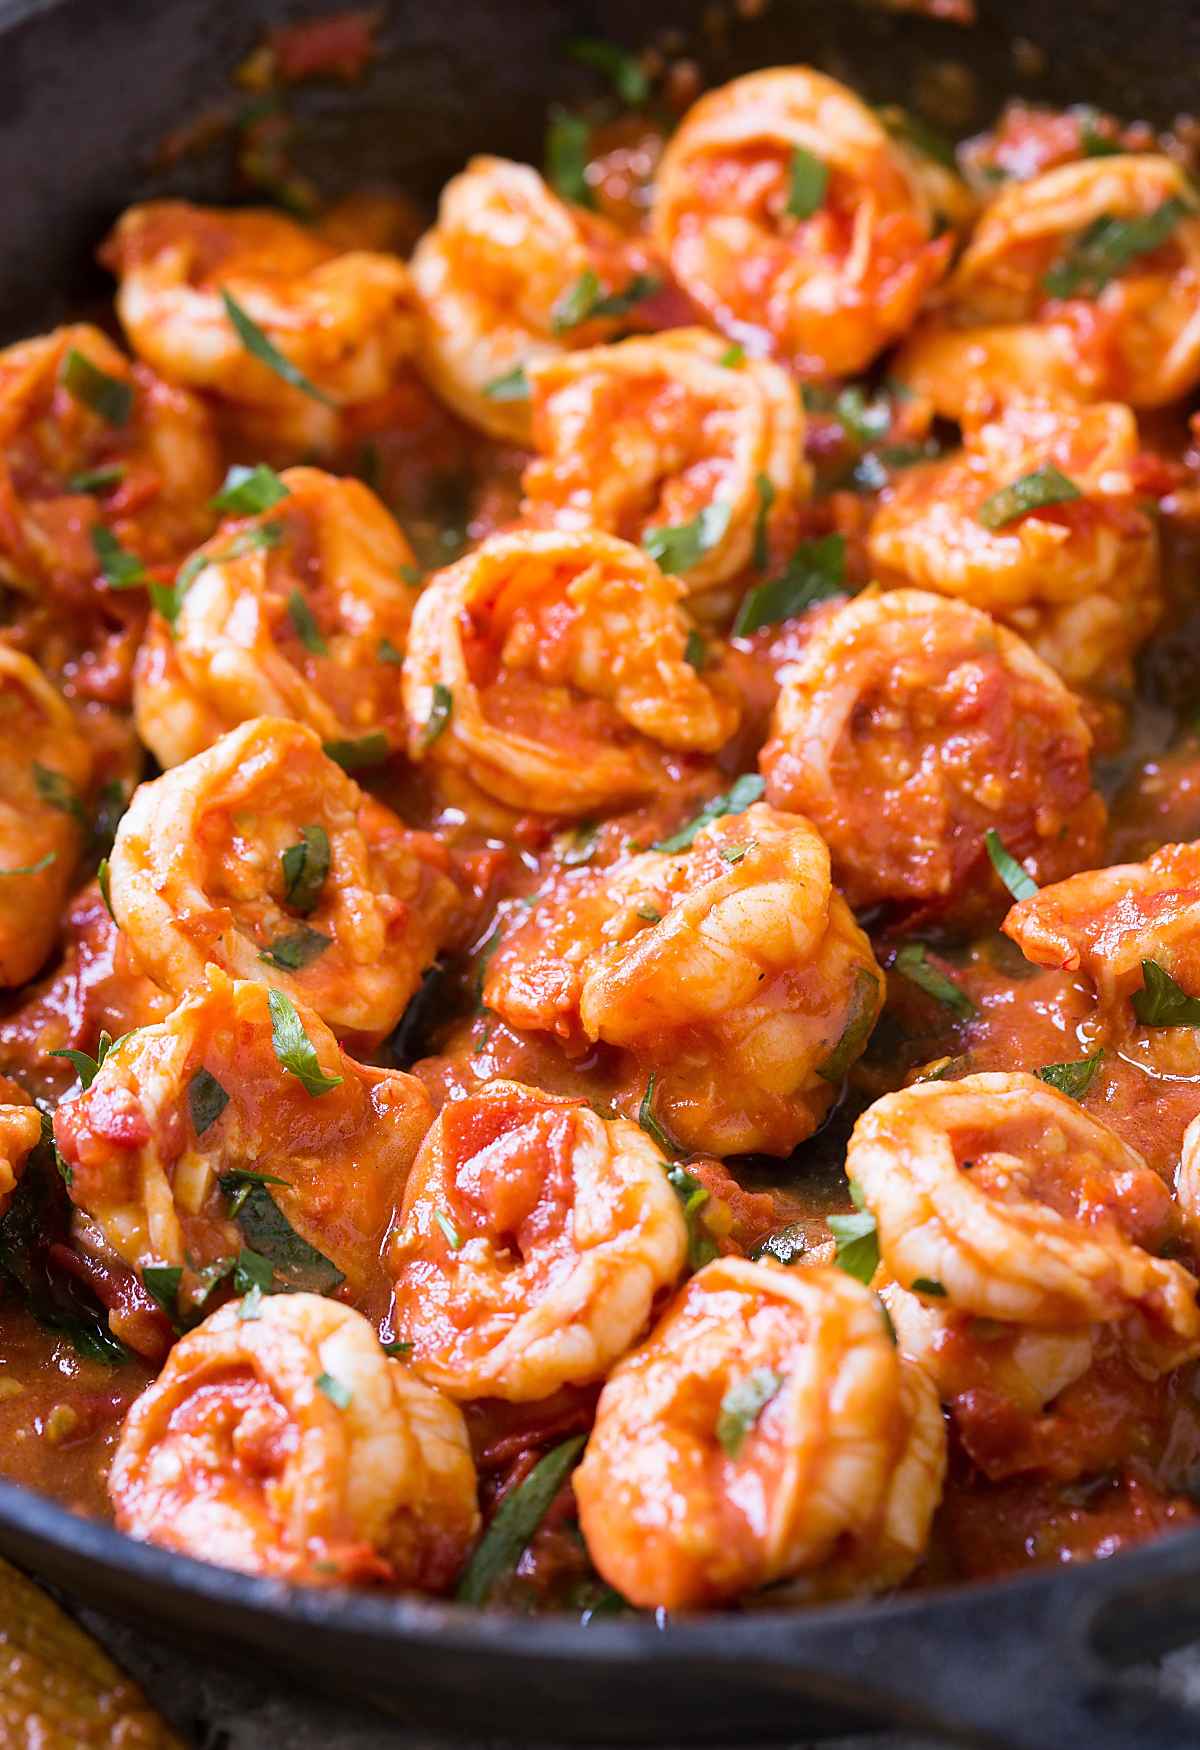 Shrimp with tomato sauce in cast iron skillet.